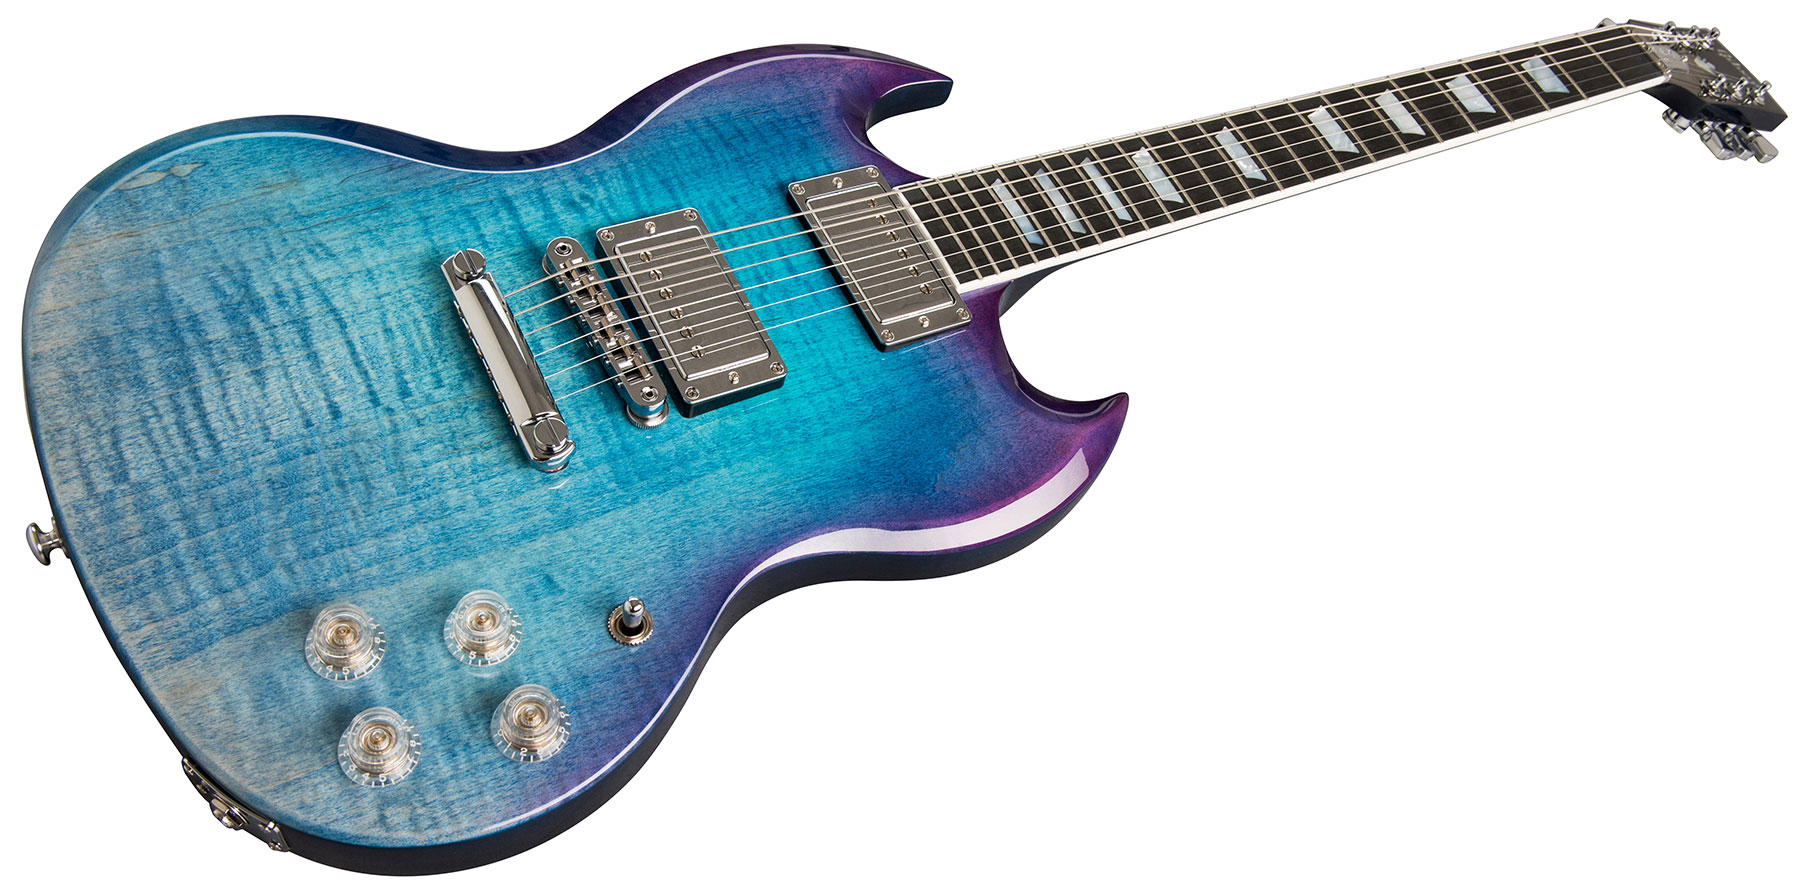 Gibson Sg Standard Hp-ii High Performance 2019 2h Ht Ric - Blueberry Fade - Double cut electric guitar - Variation 3